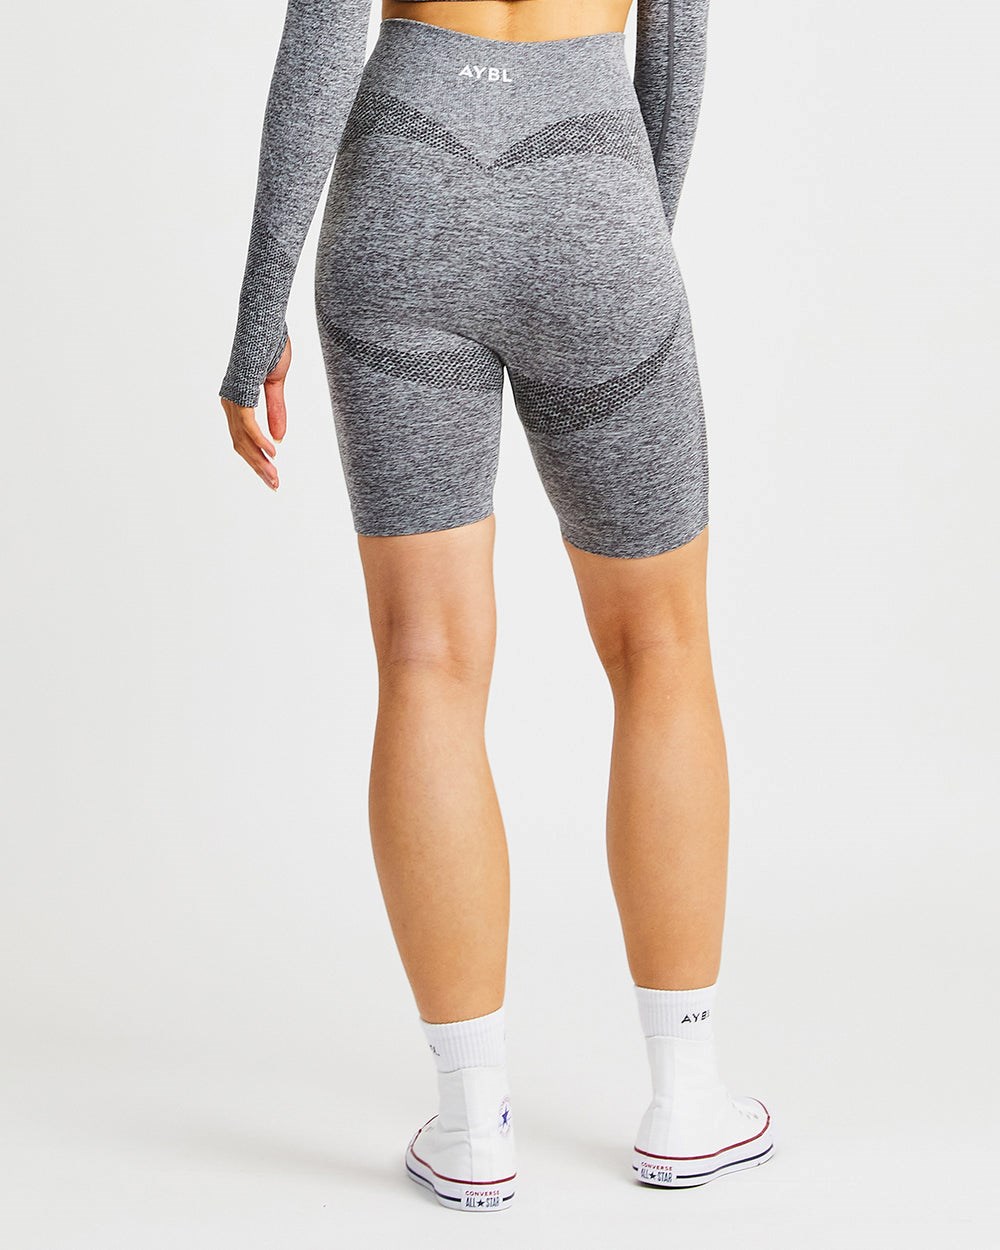 Bermudas AYBL Mujer Outlet México - Motion Seamless Cycling Shorts Grises